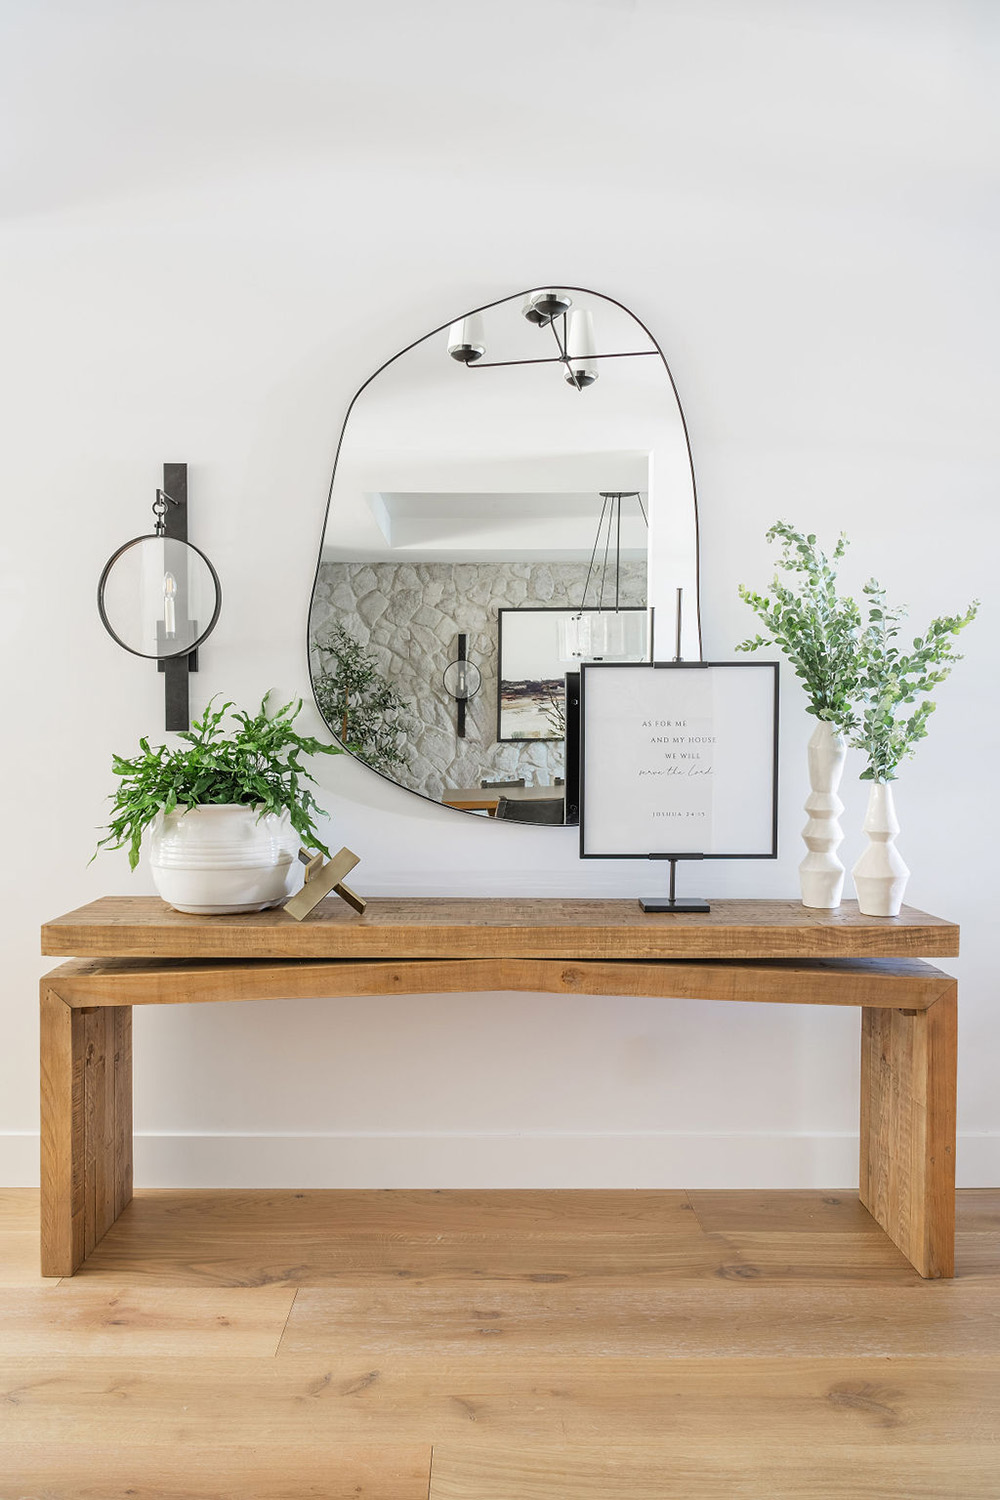 entry way table with plants, artwork and organic-edged mirror design